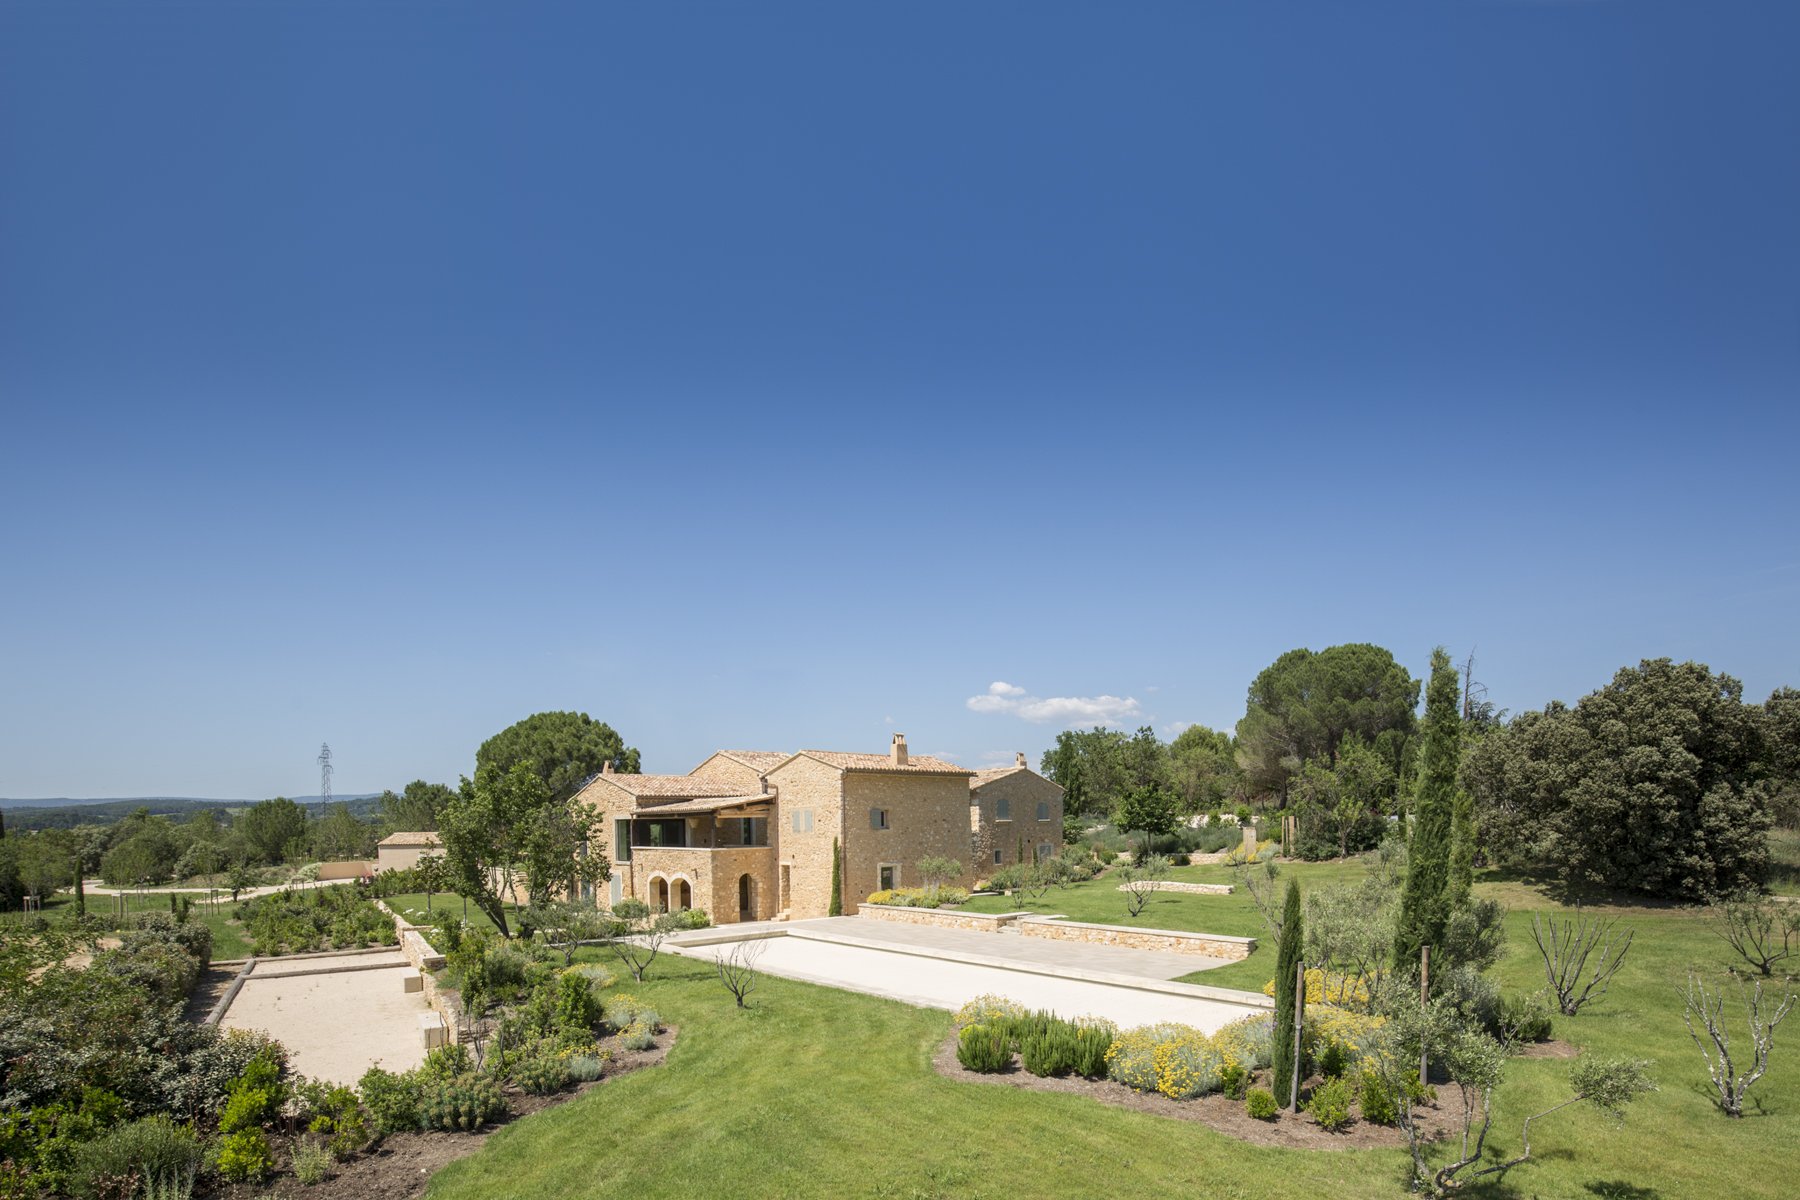 Francis+York+ Exquisitely Renovated Provencal Mas in Bonnieux, Luberon 00027.jpg